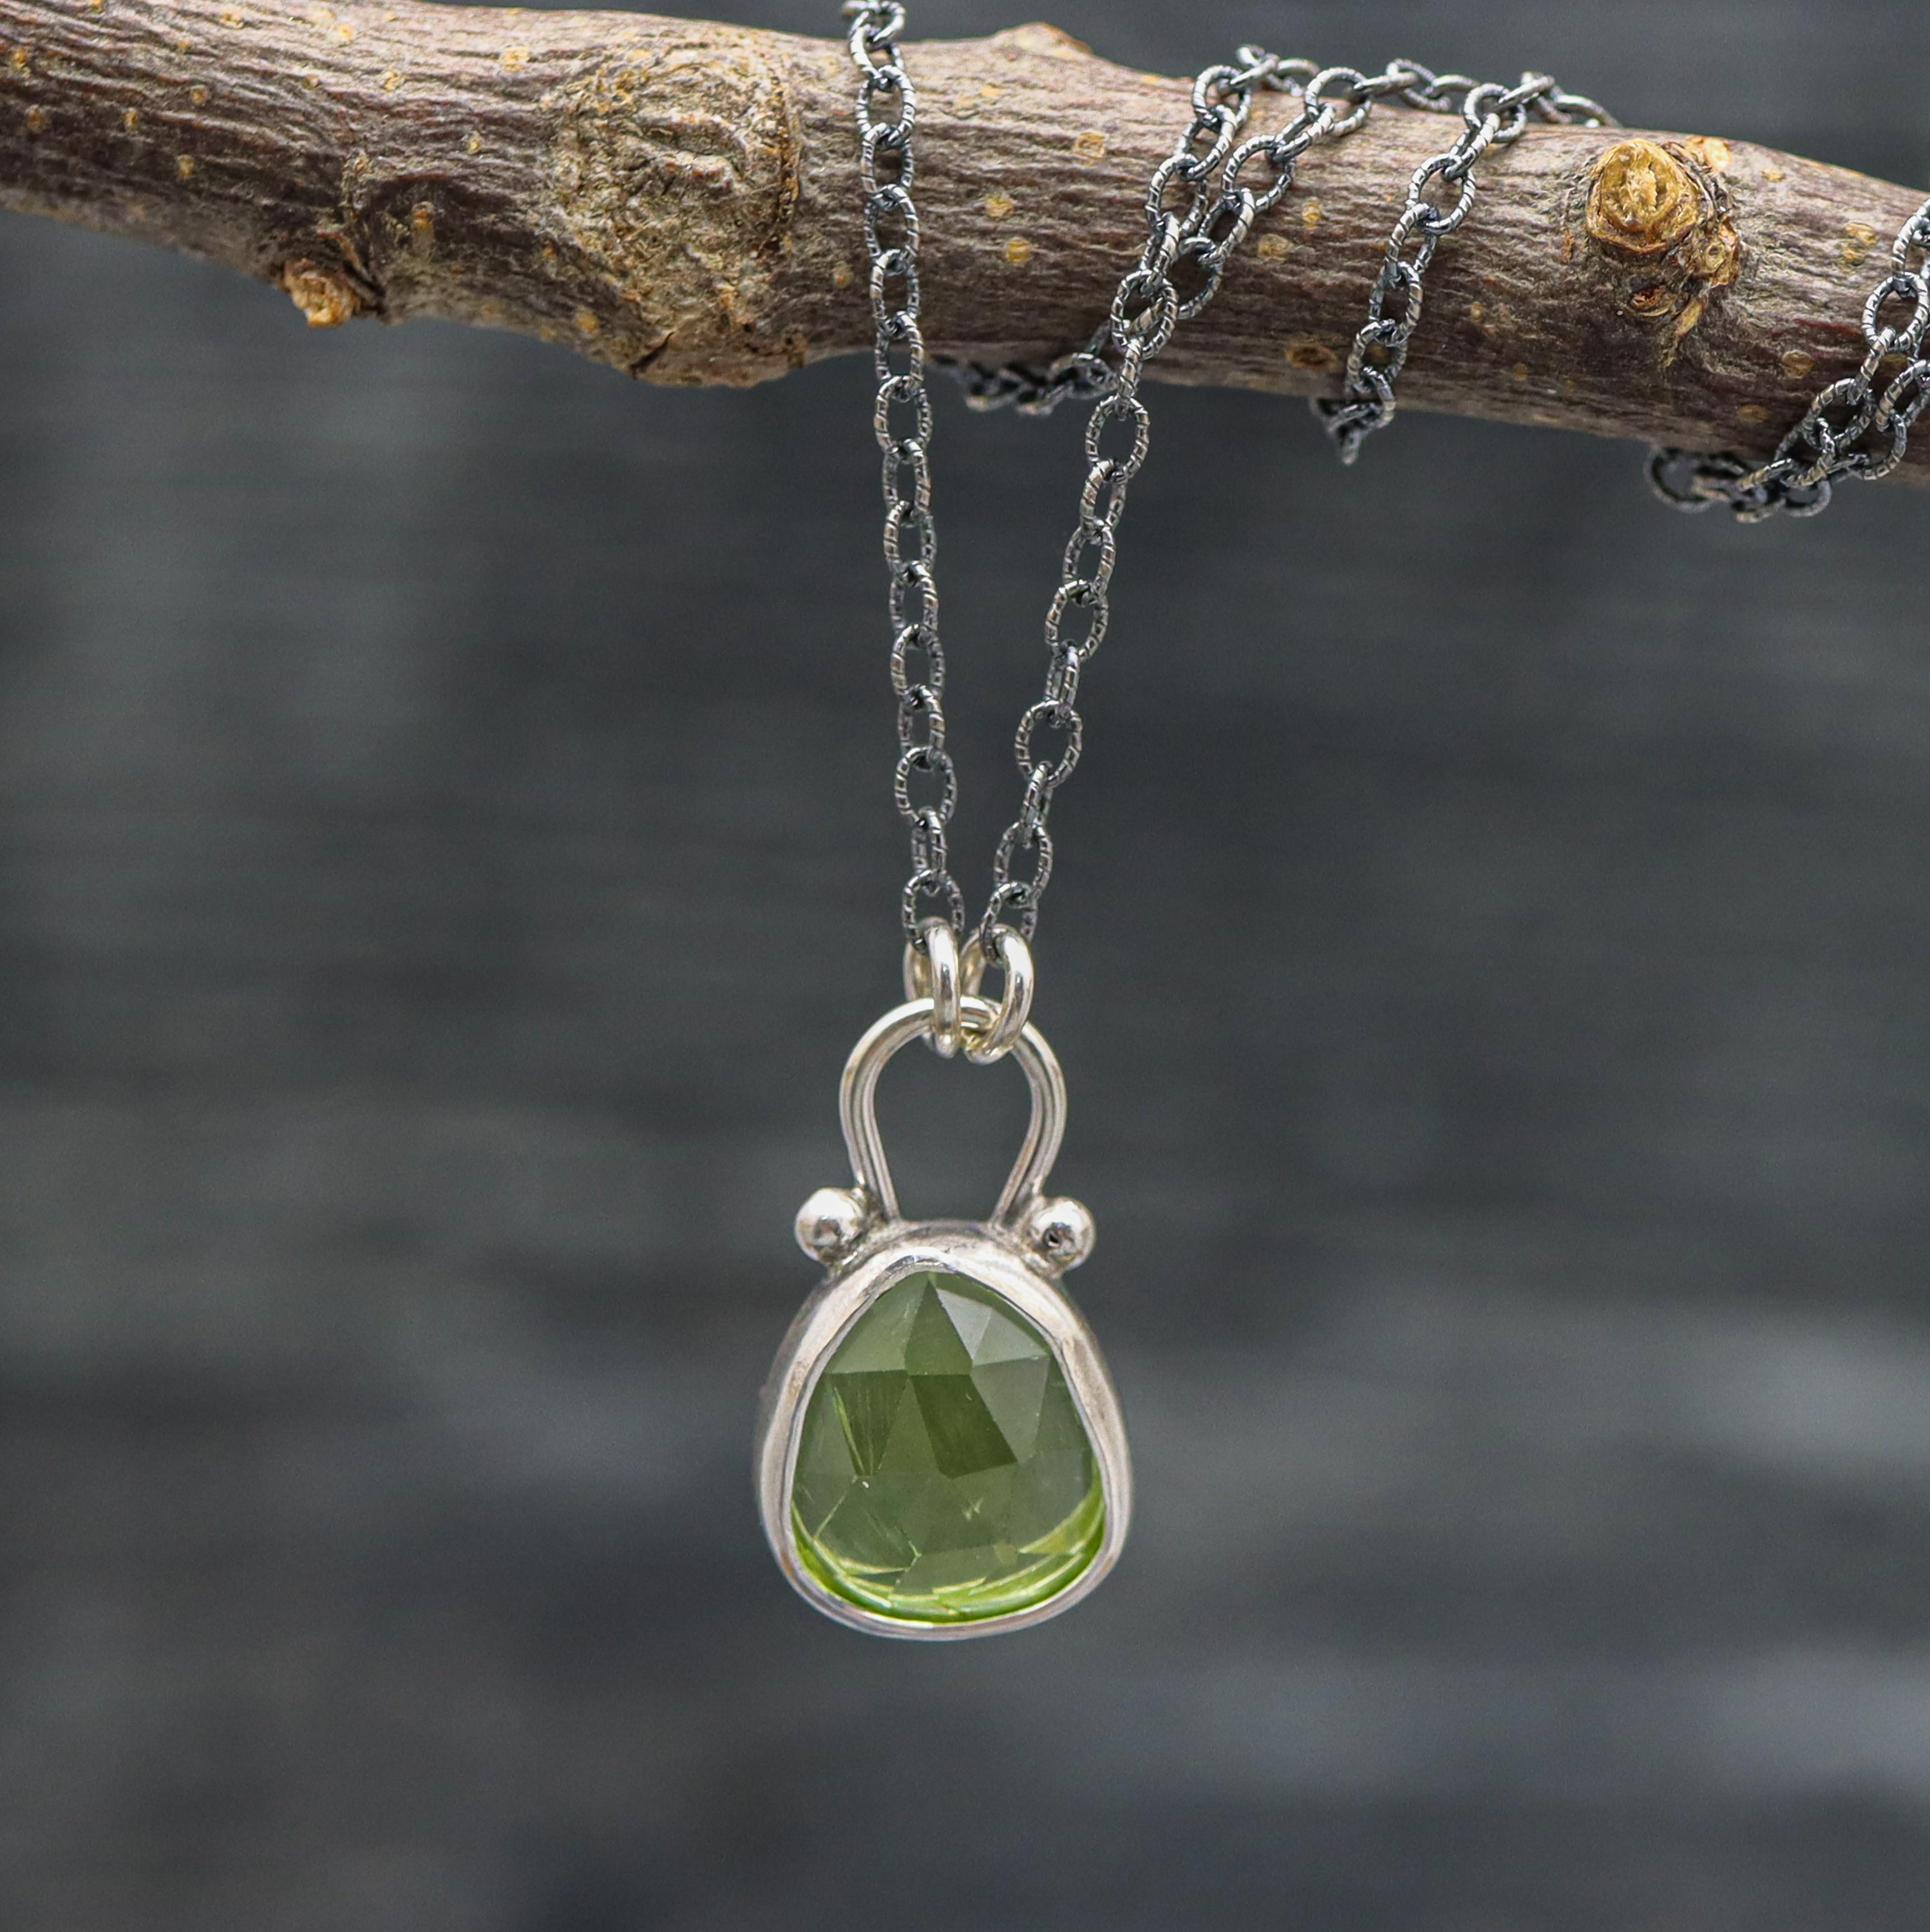 Green Peridot Pendant Necklace Sterling Silver